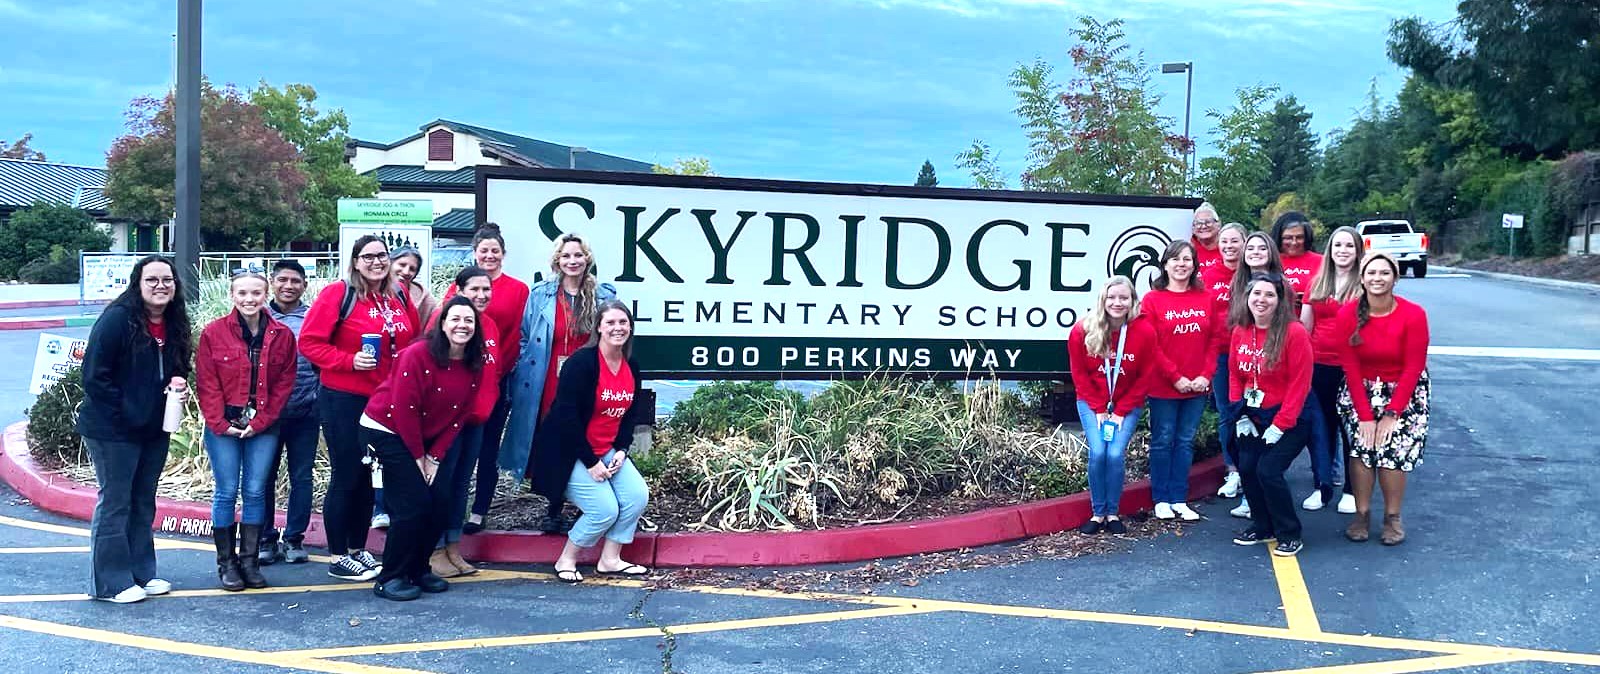 Skyridge Elementary: Group of people in front of school sign.